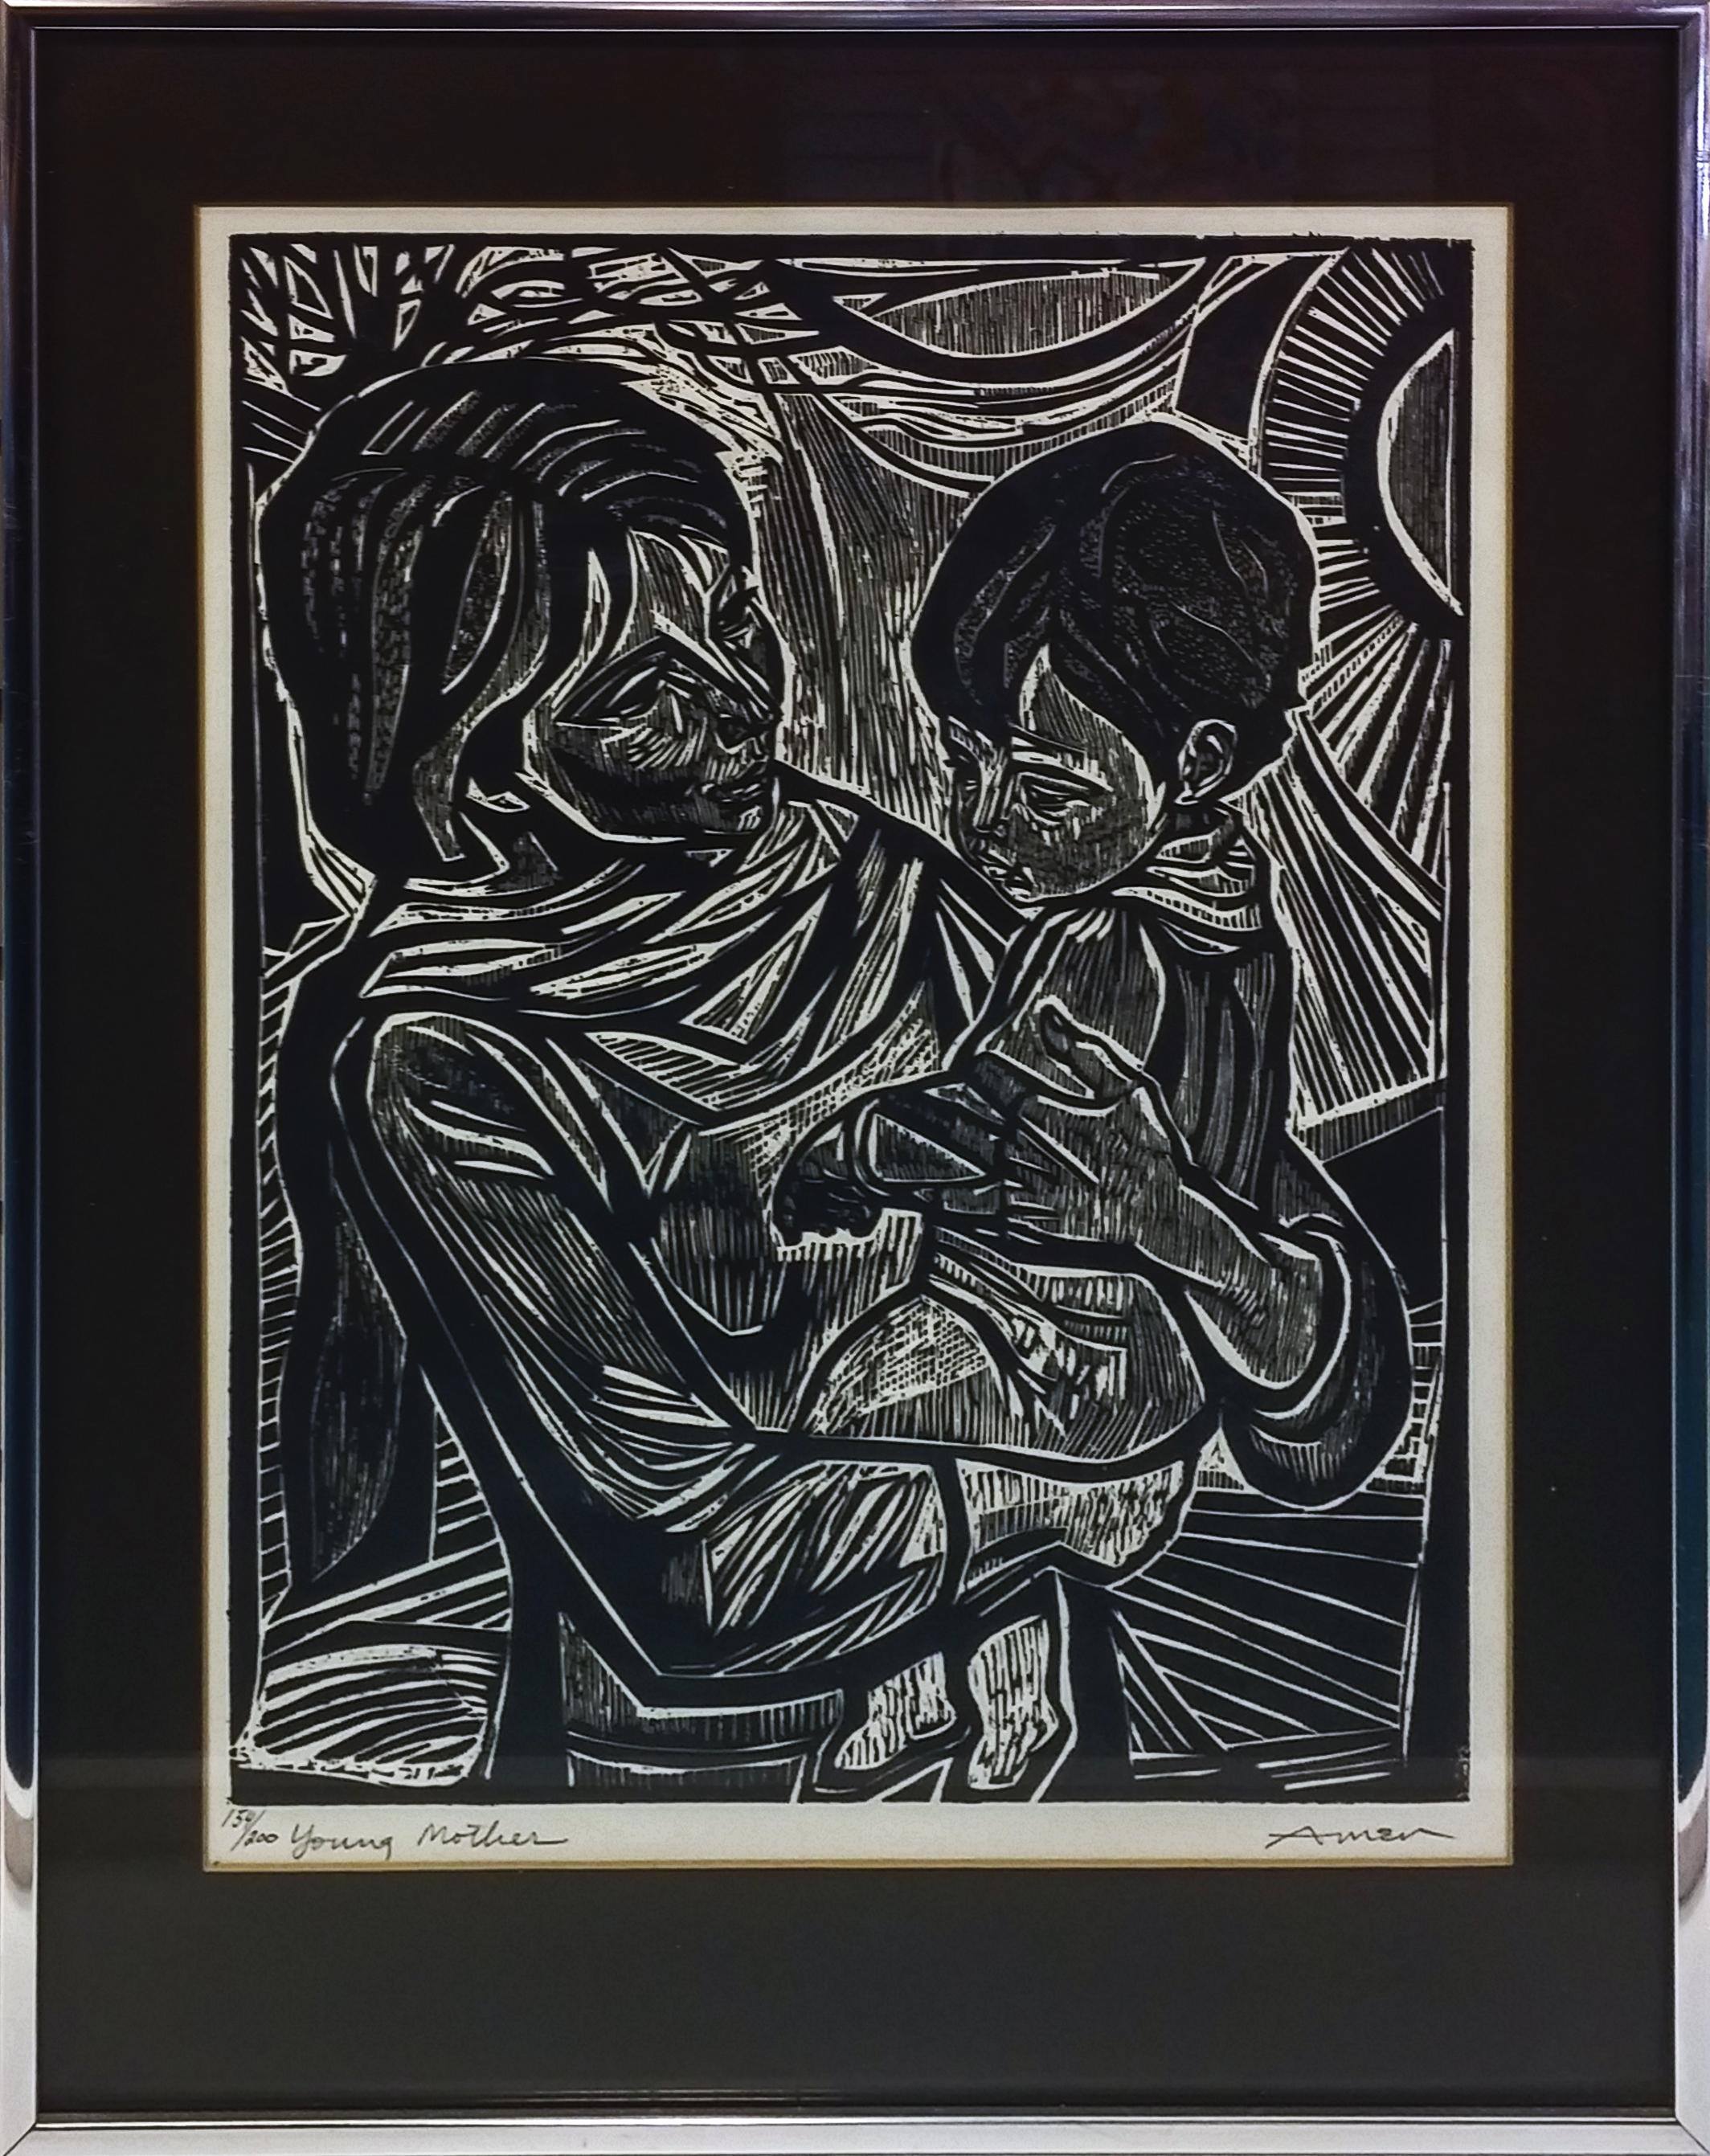 YOUNG MOTHER - Print by Irving Amen